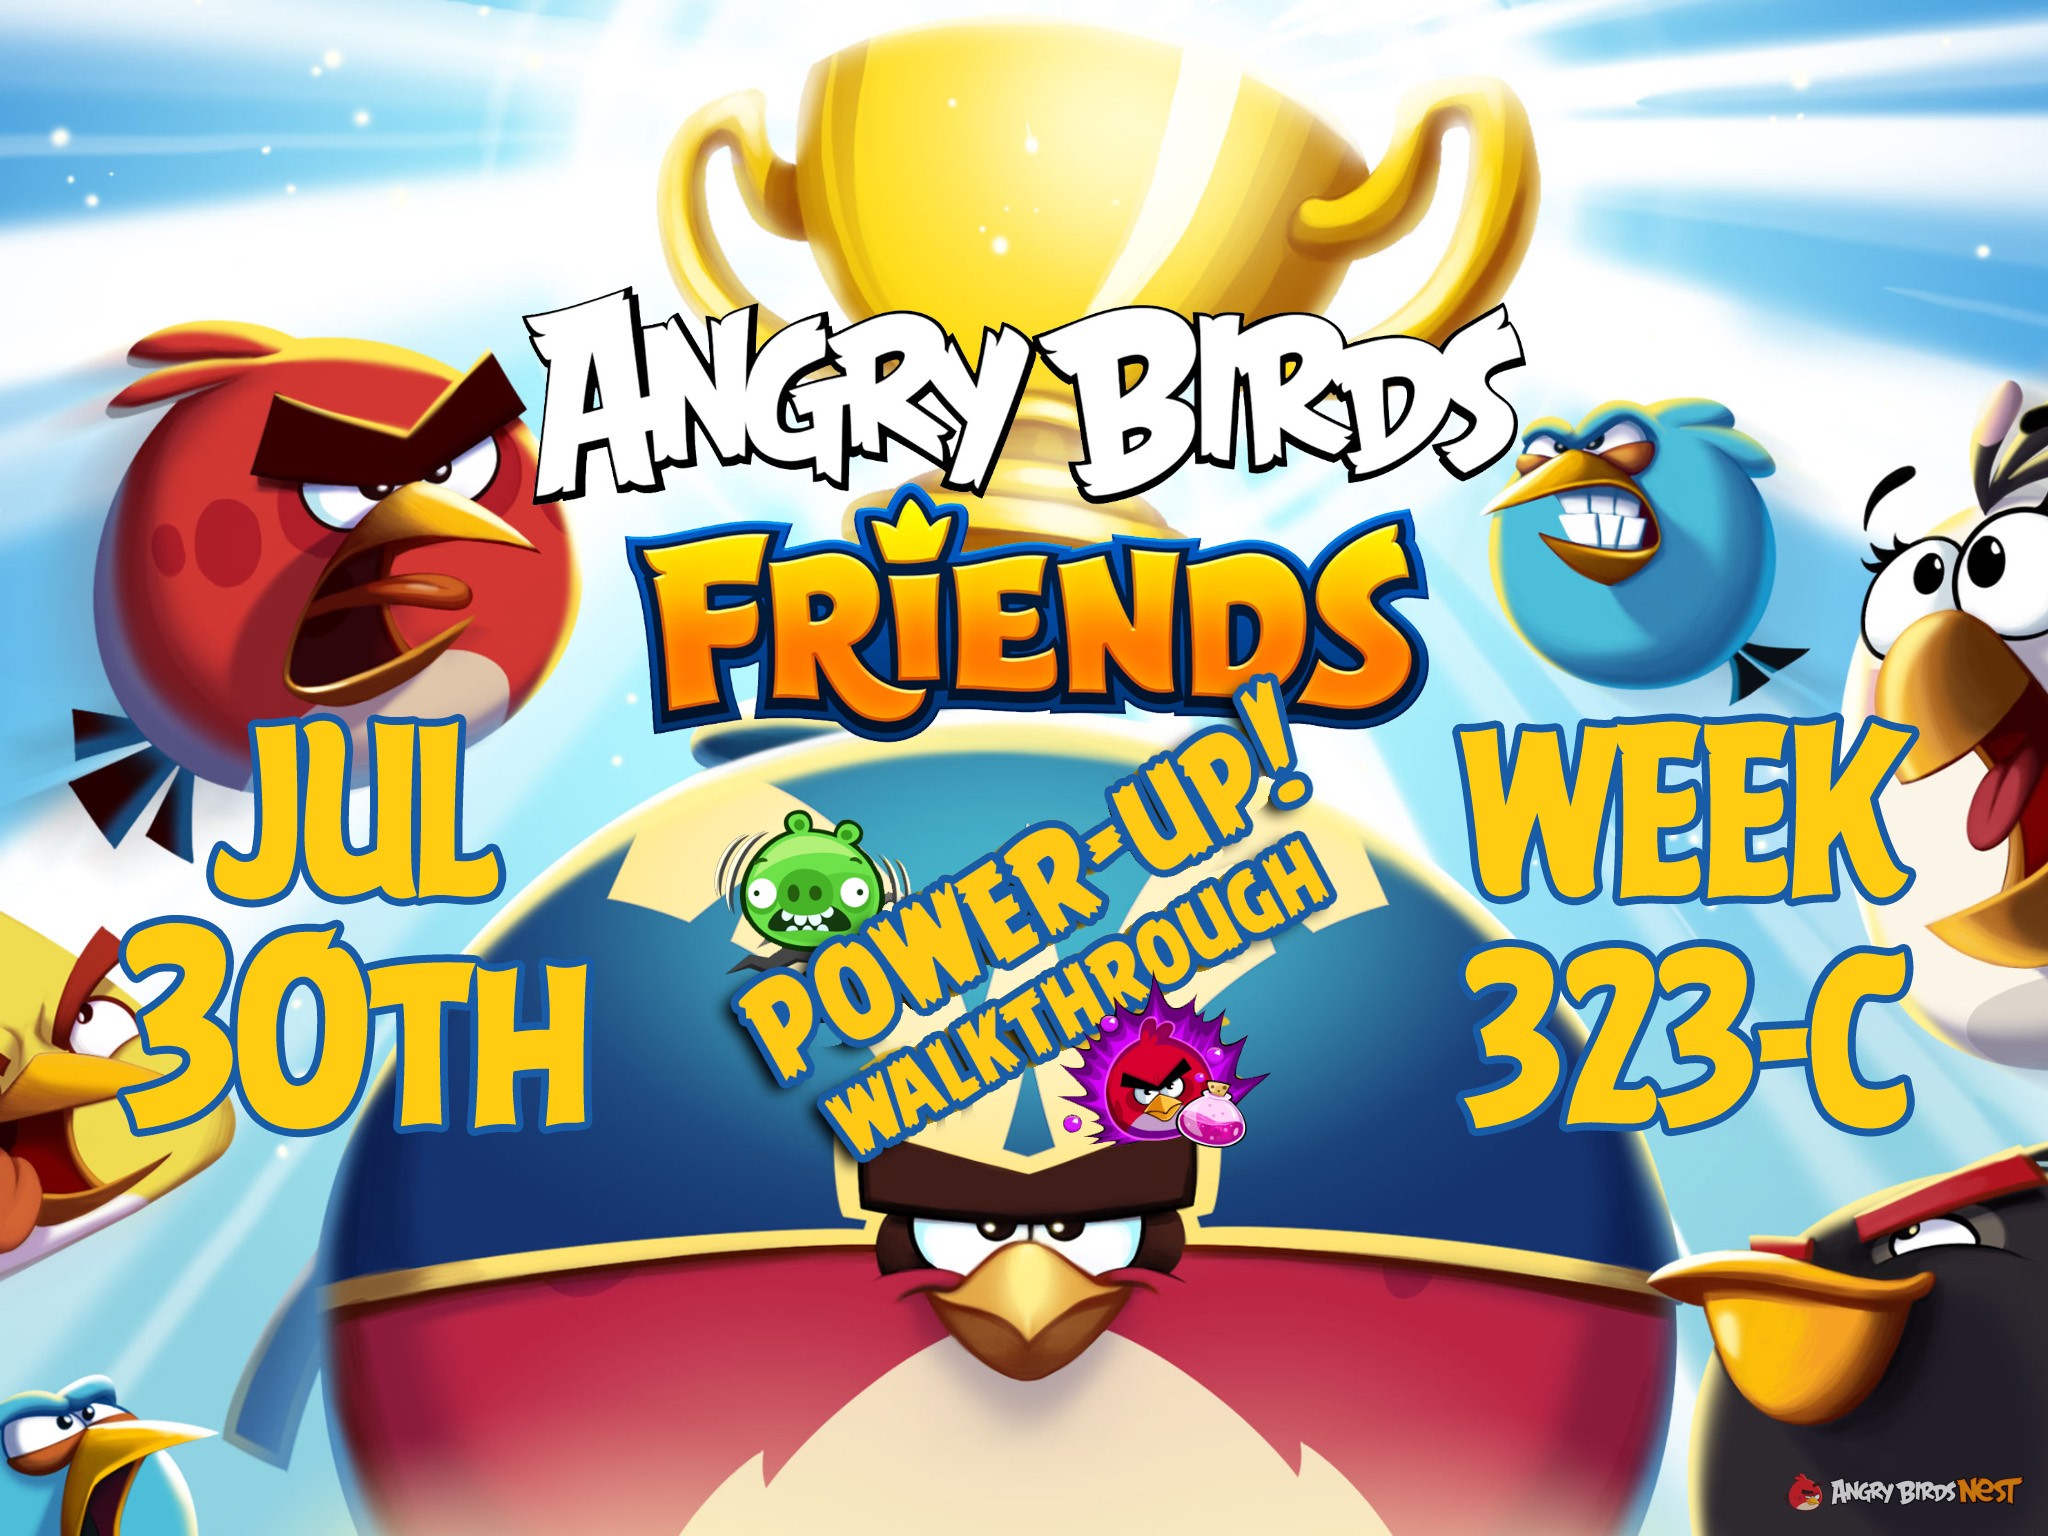 Angry-Birds-Friends-Tournament-Week-323-C-Feature-Image-PU